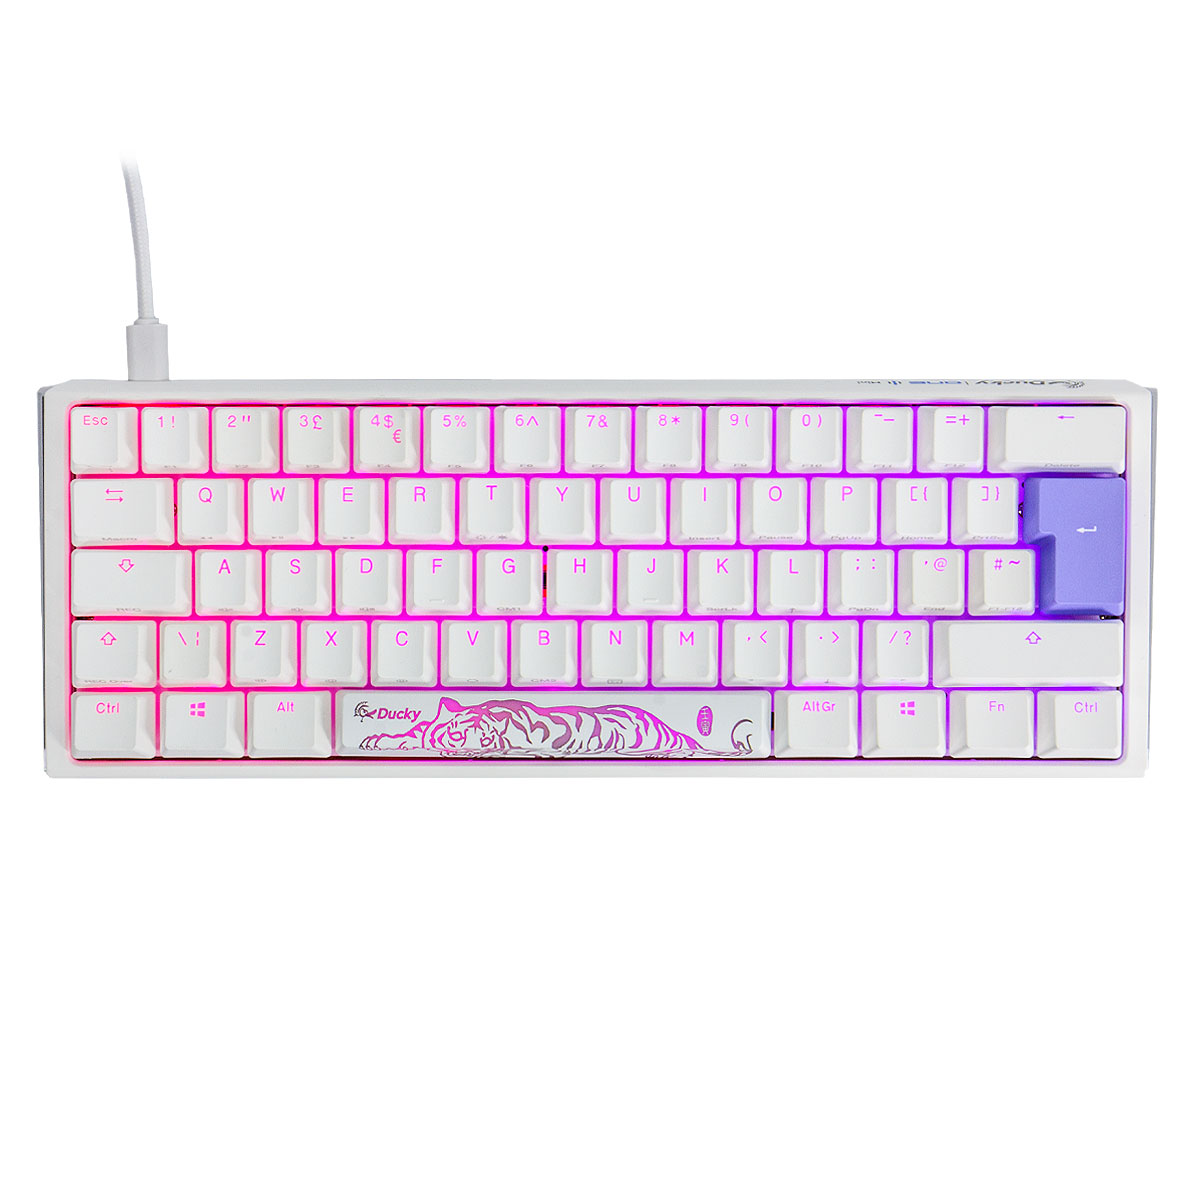 Ducky One 3 Classic 60 USB RGB Mechanical Gaming Keyboard Cherry Red - Pure White UK Layout